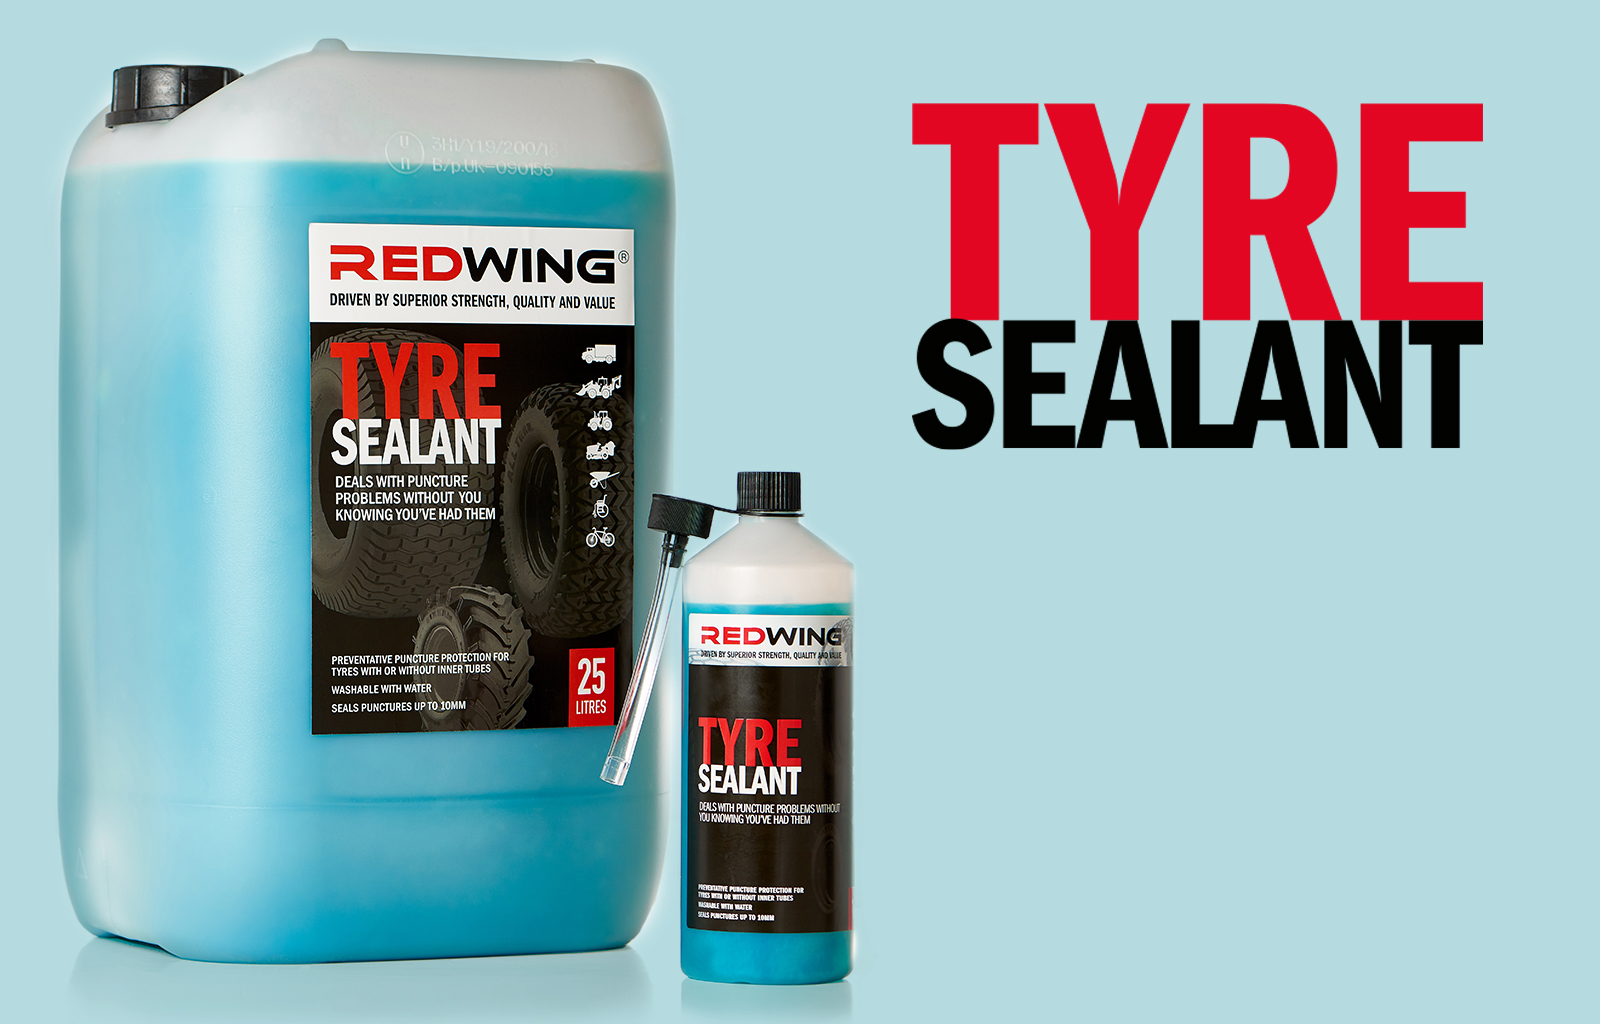 Redwing Tyre Sealant - with leading fibre-technology